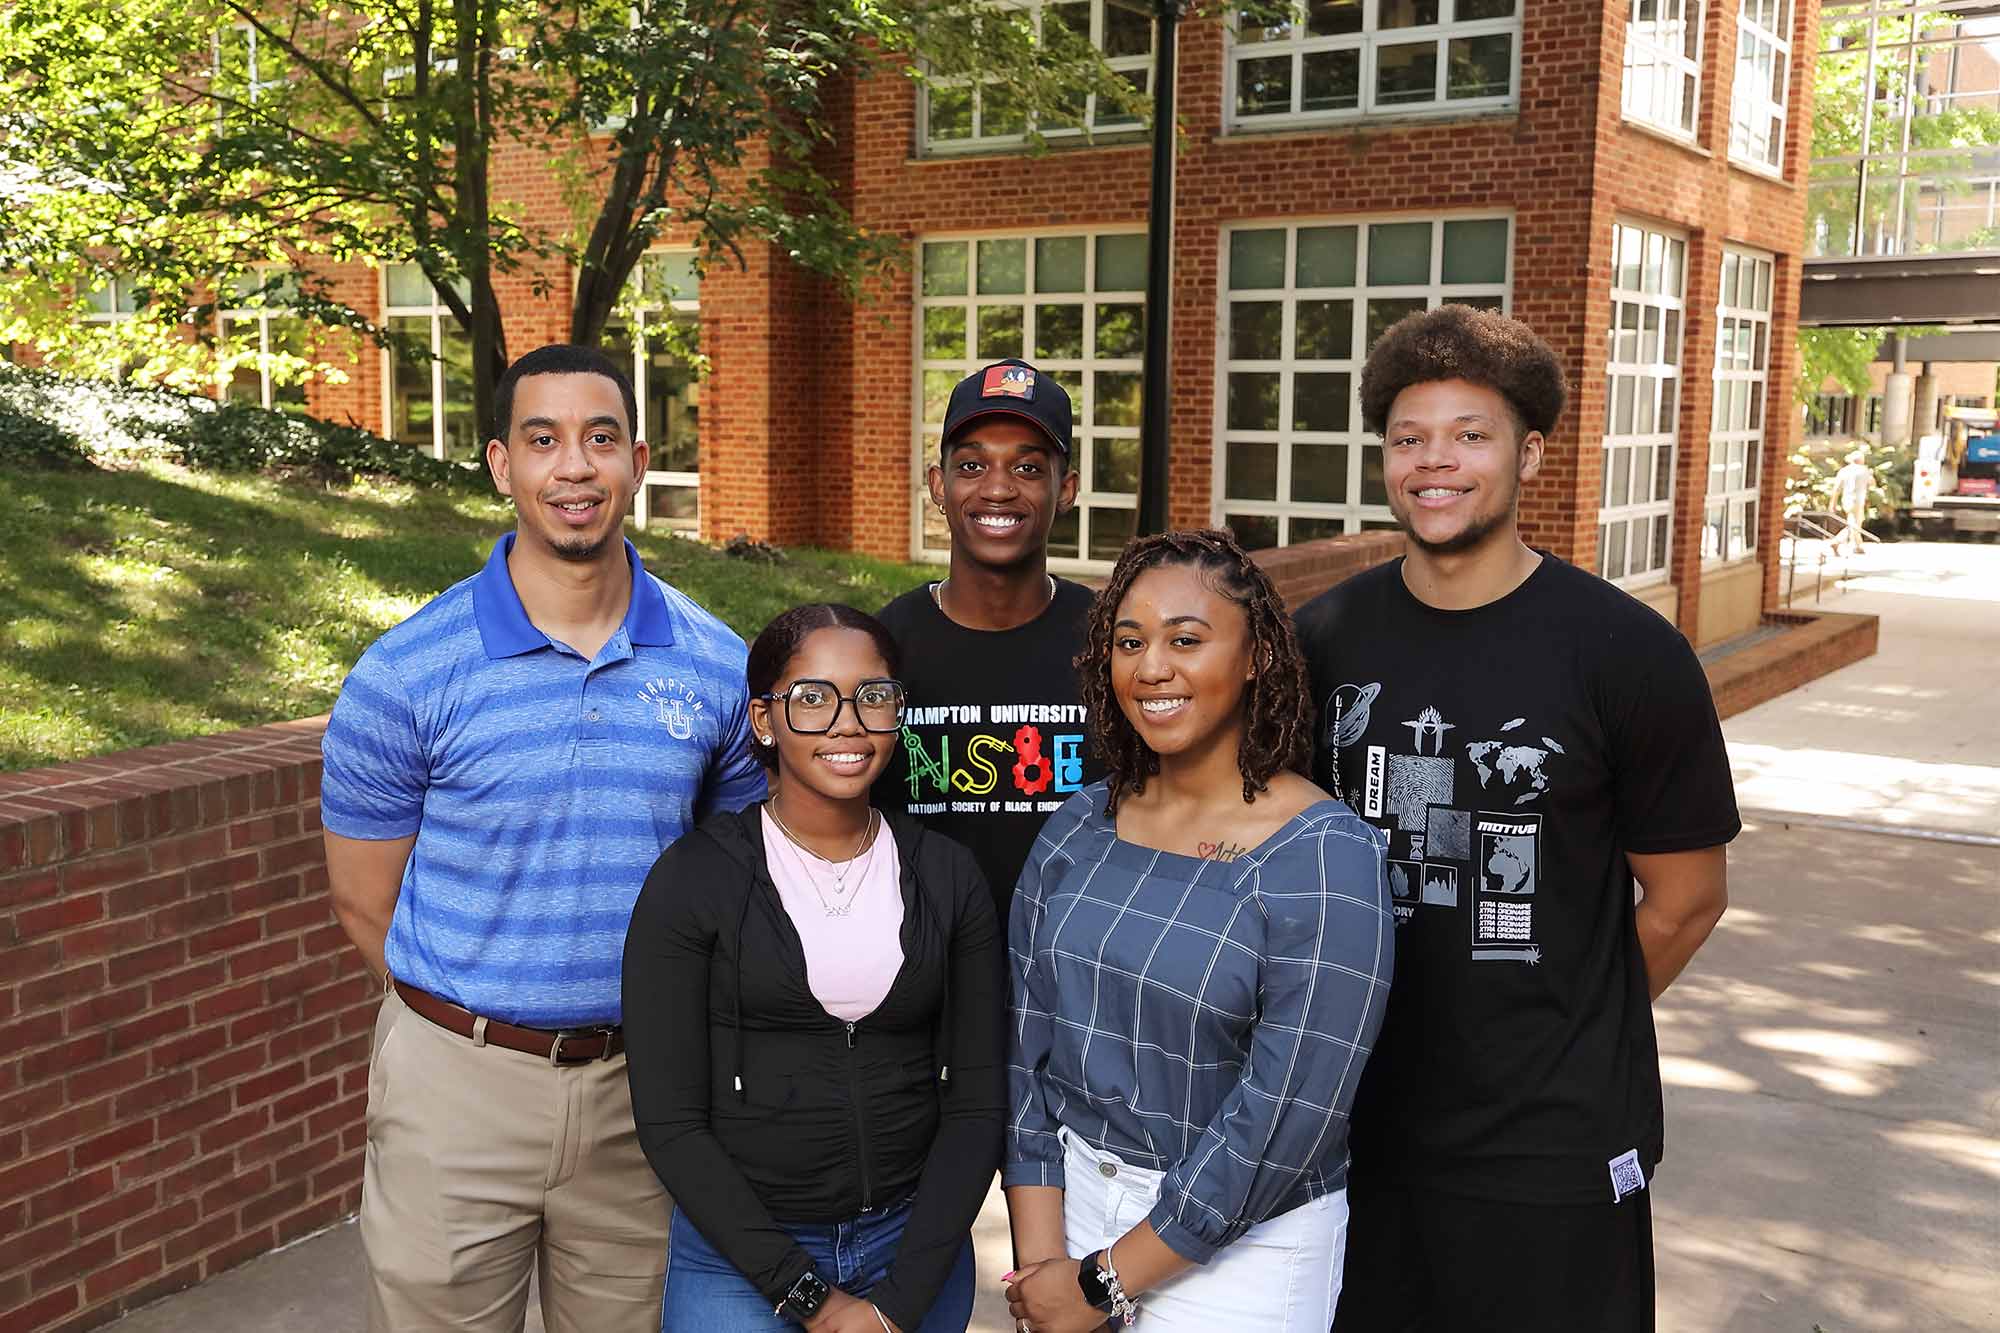 Hampton University students and professor stand on Grounds at UVA, smiling at the camera.